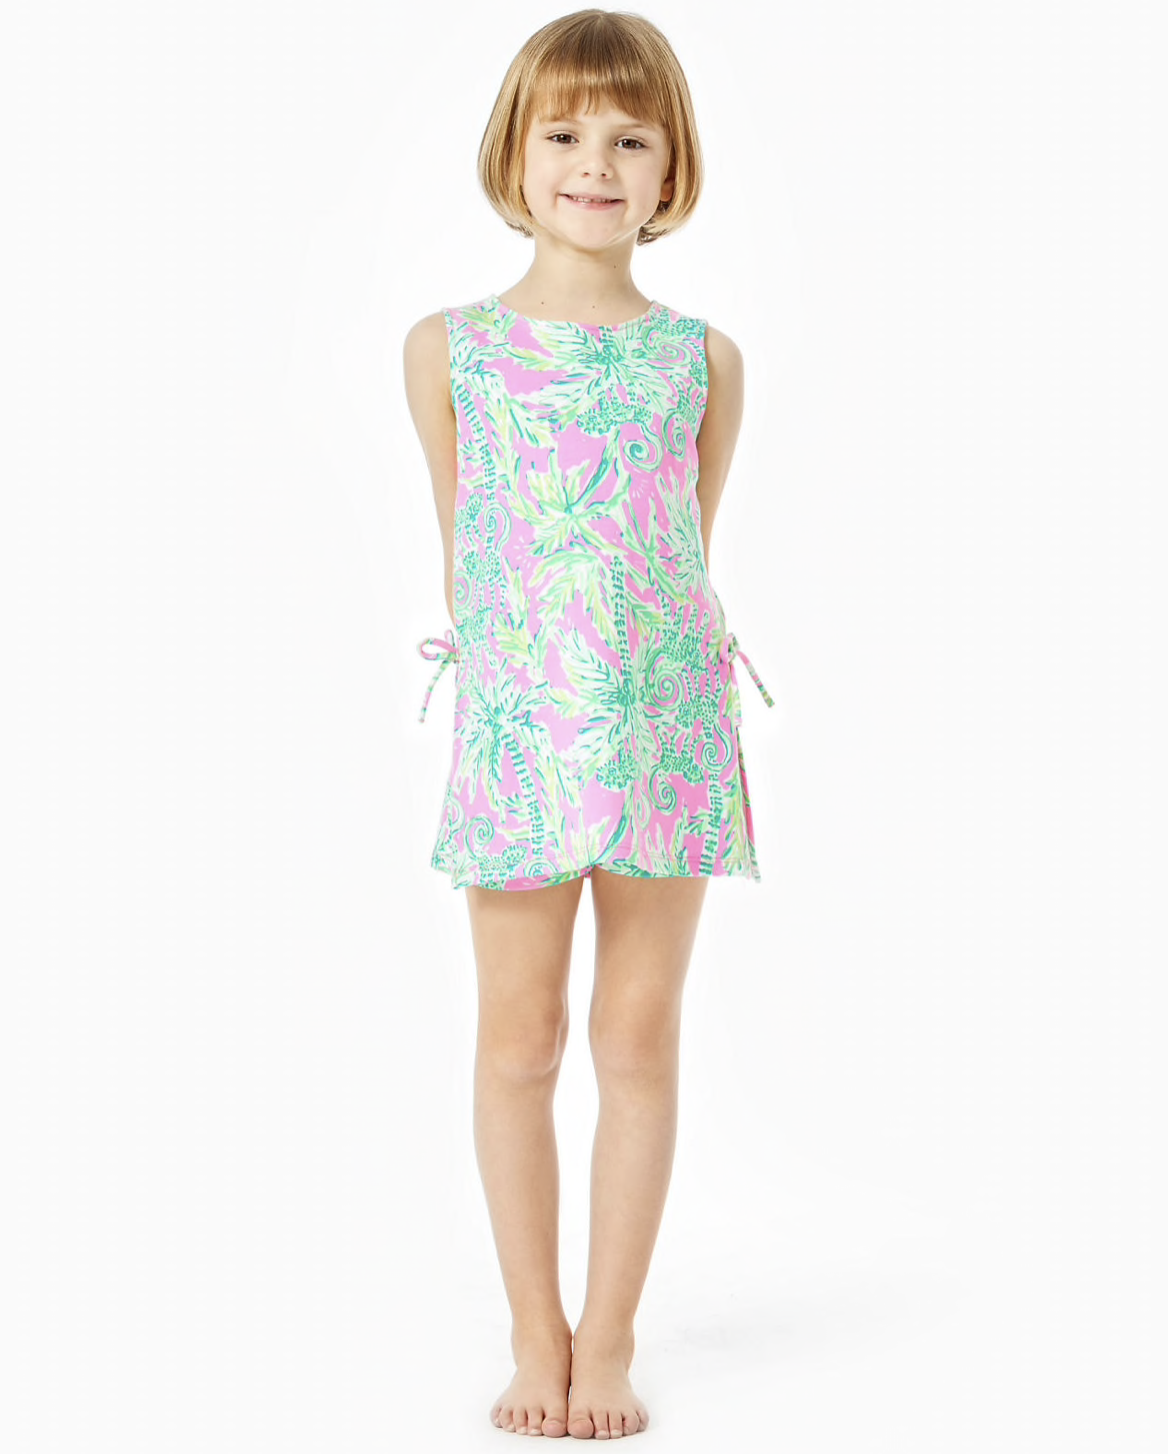 Lilly Pulitzer Dressed for Summer Sale